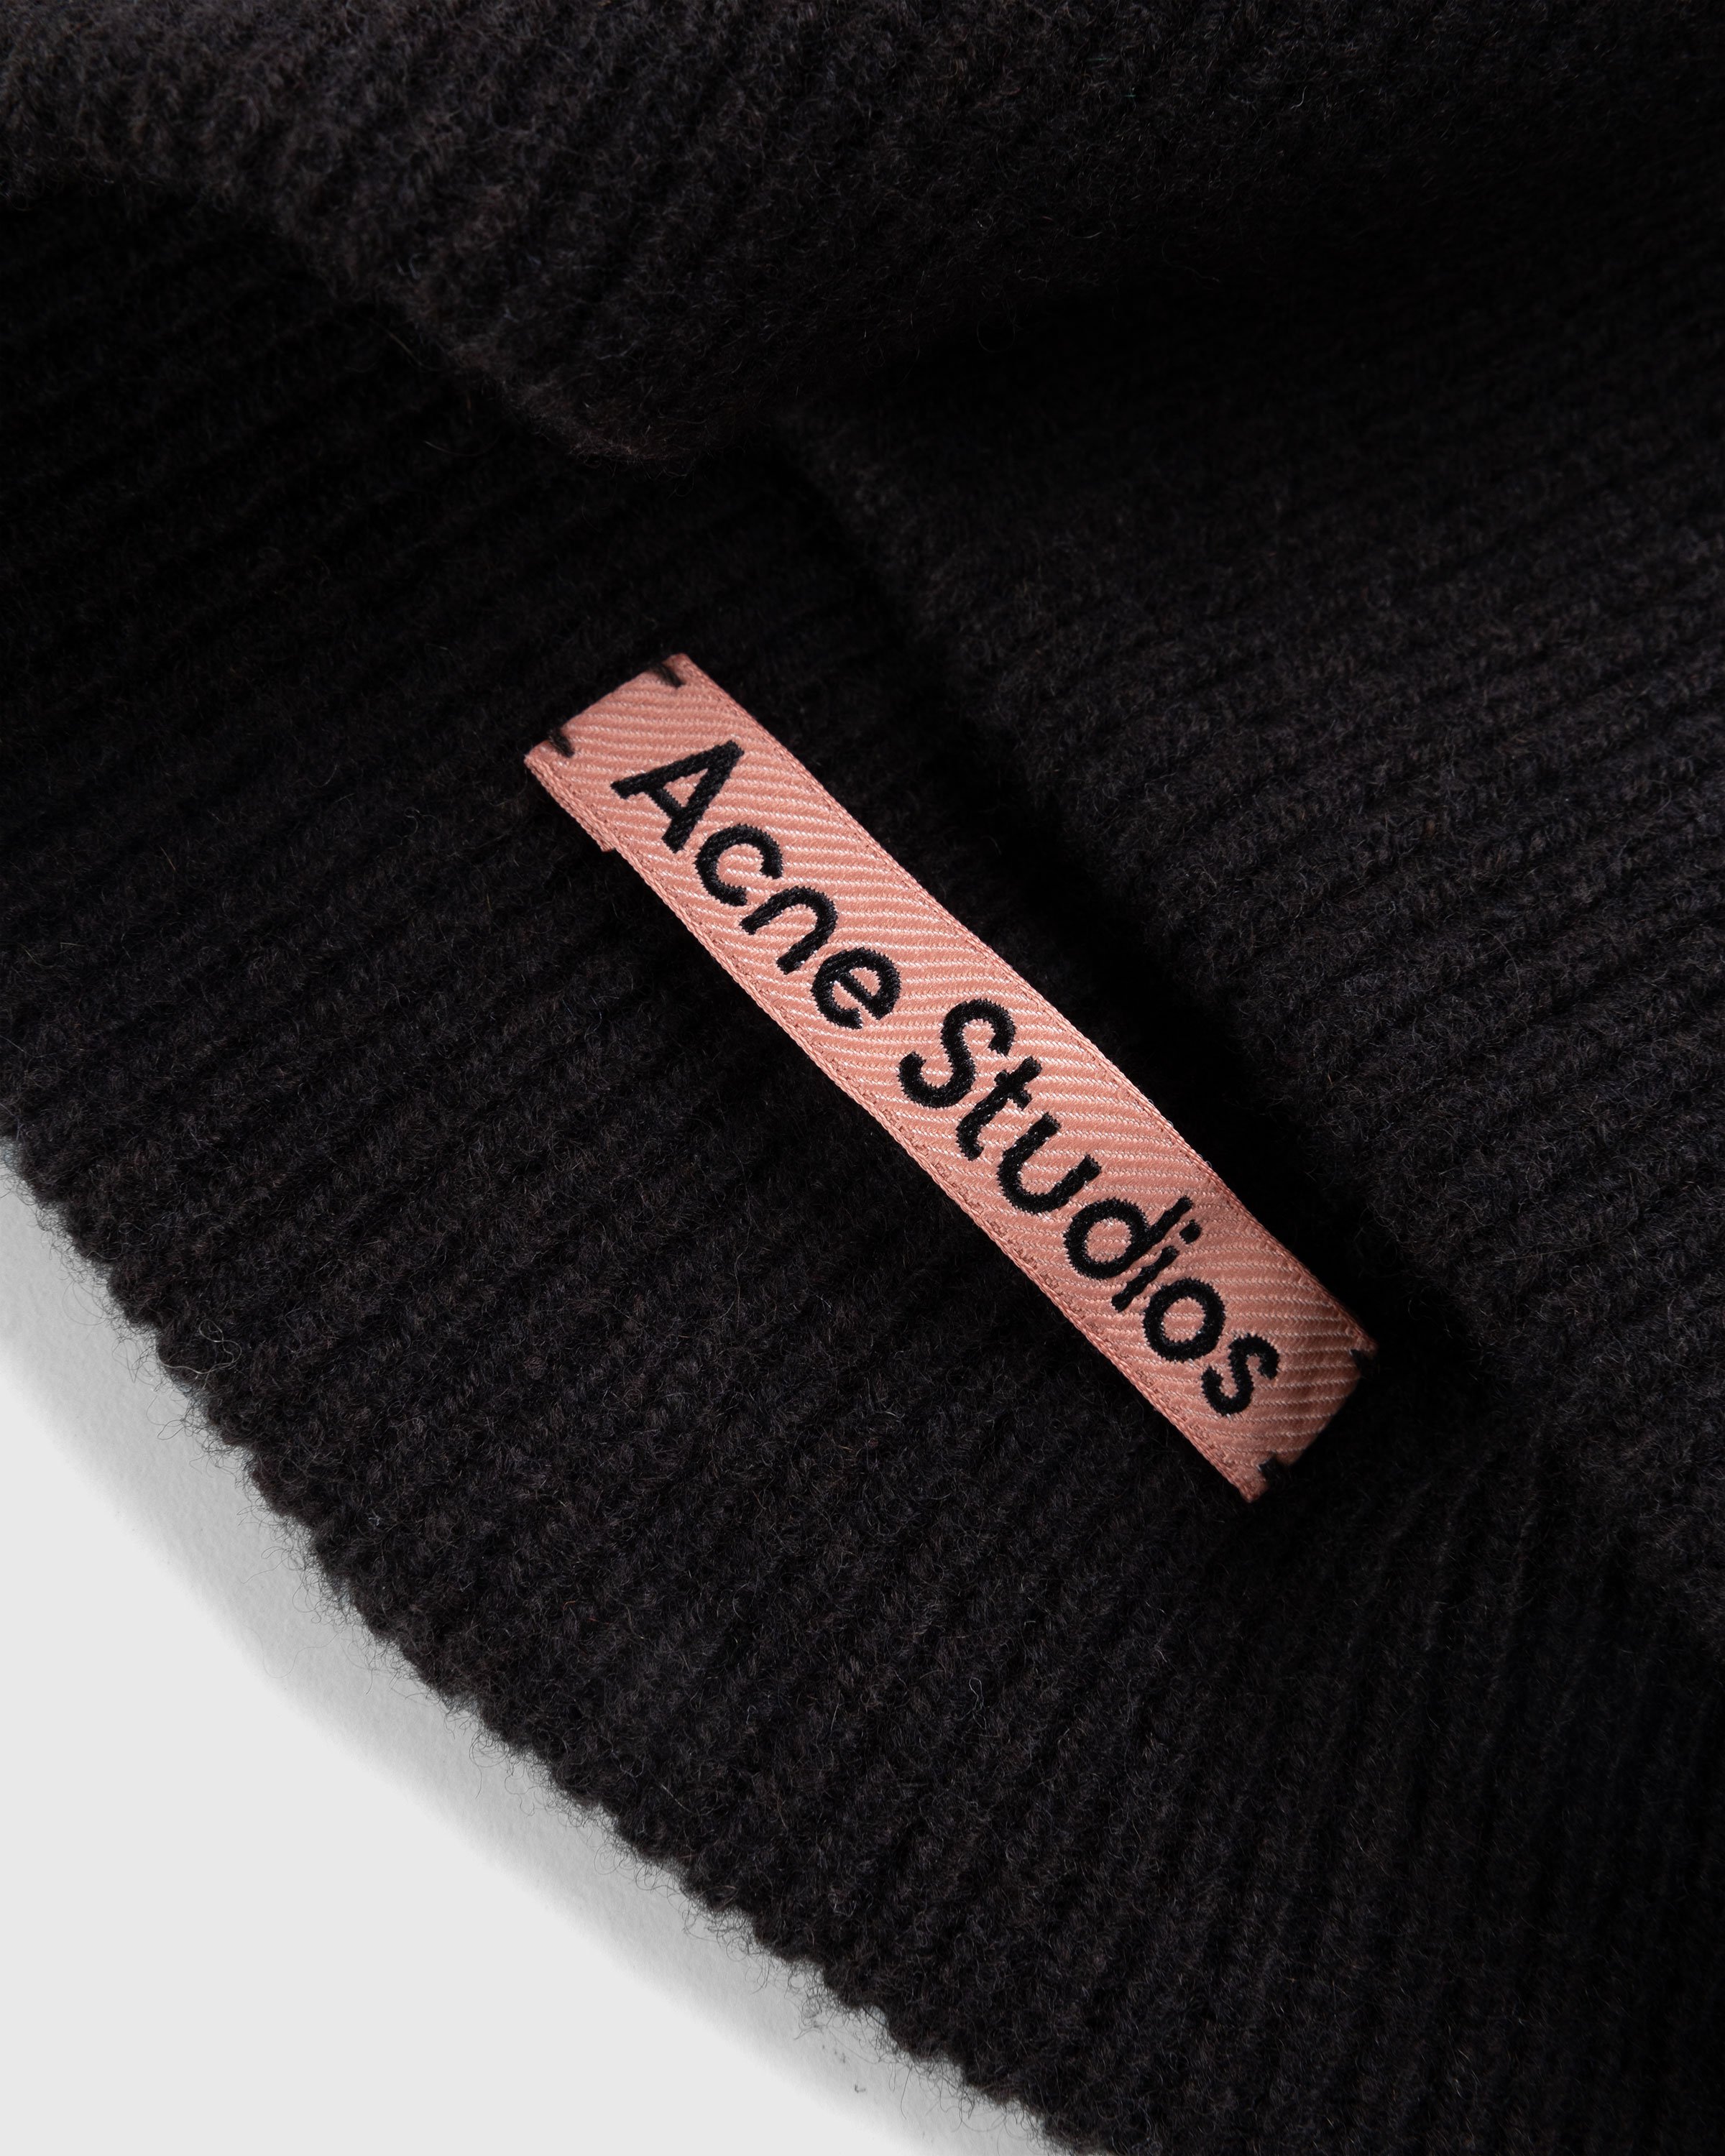 Acne Studios - Wool Cashmere Beanie Brown - Accessories - Brown - Image 3